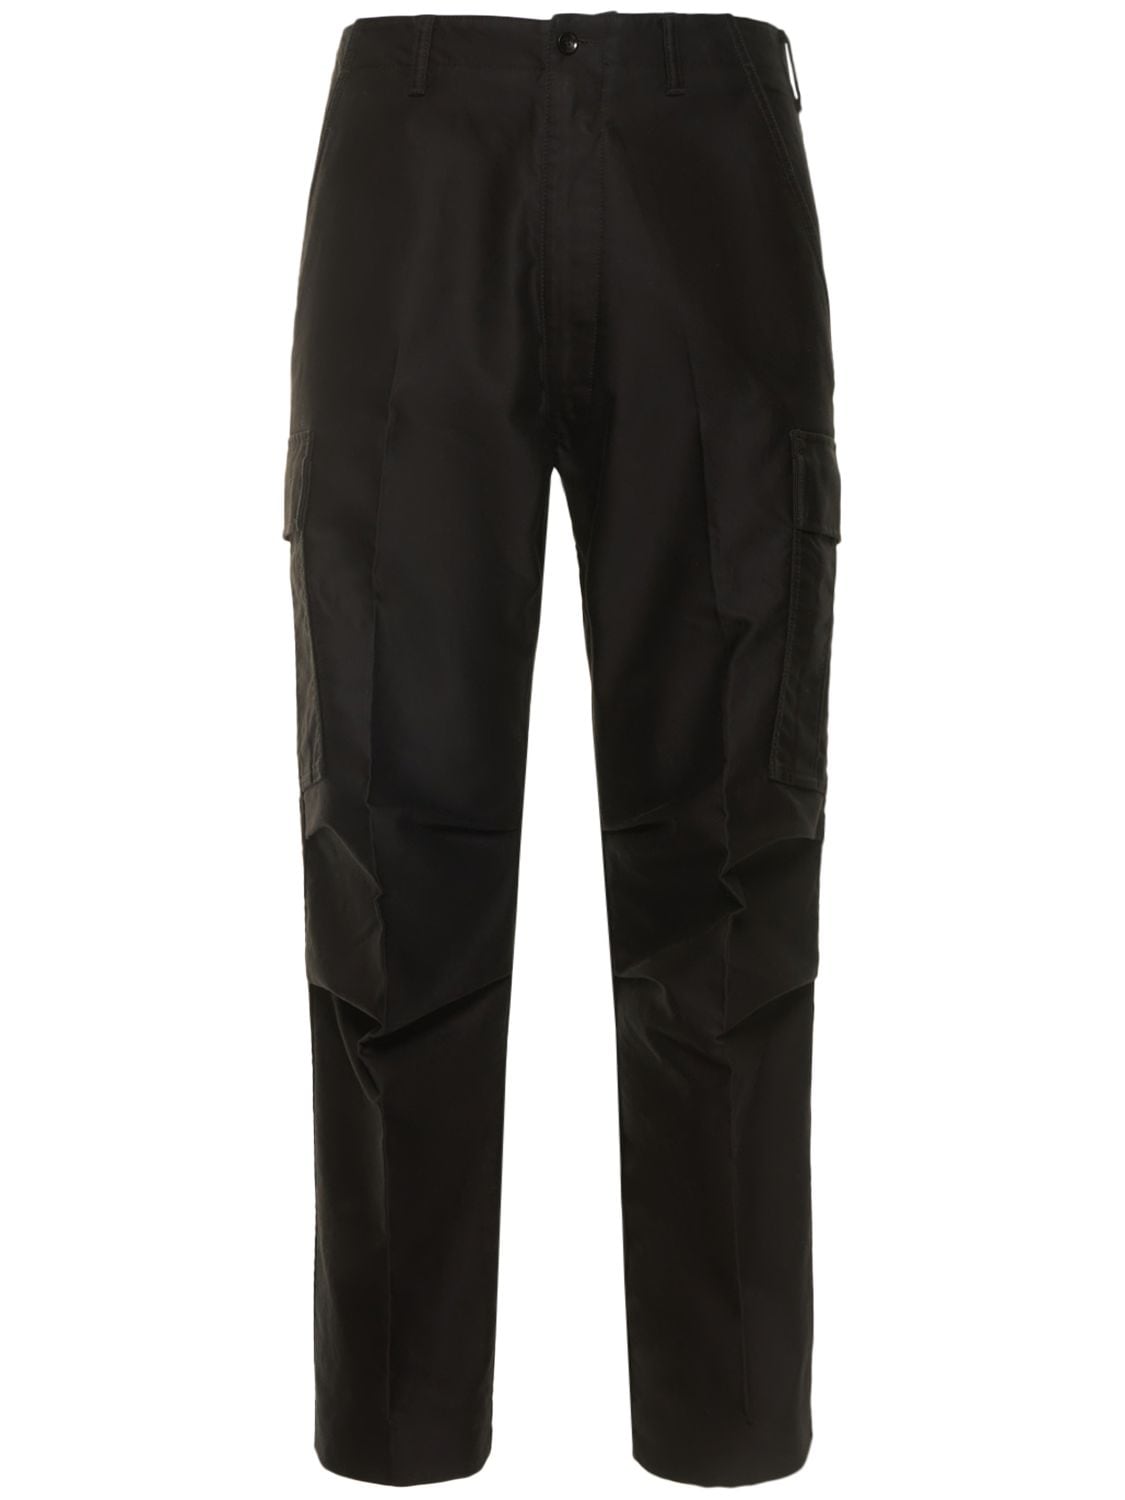 Image of Compact Cotton Cargo Sport Pants